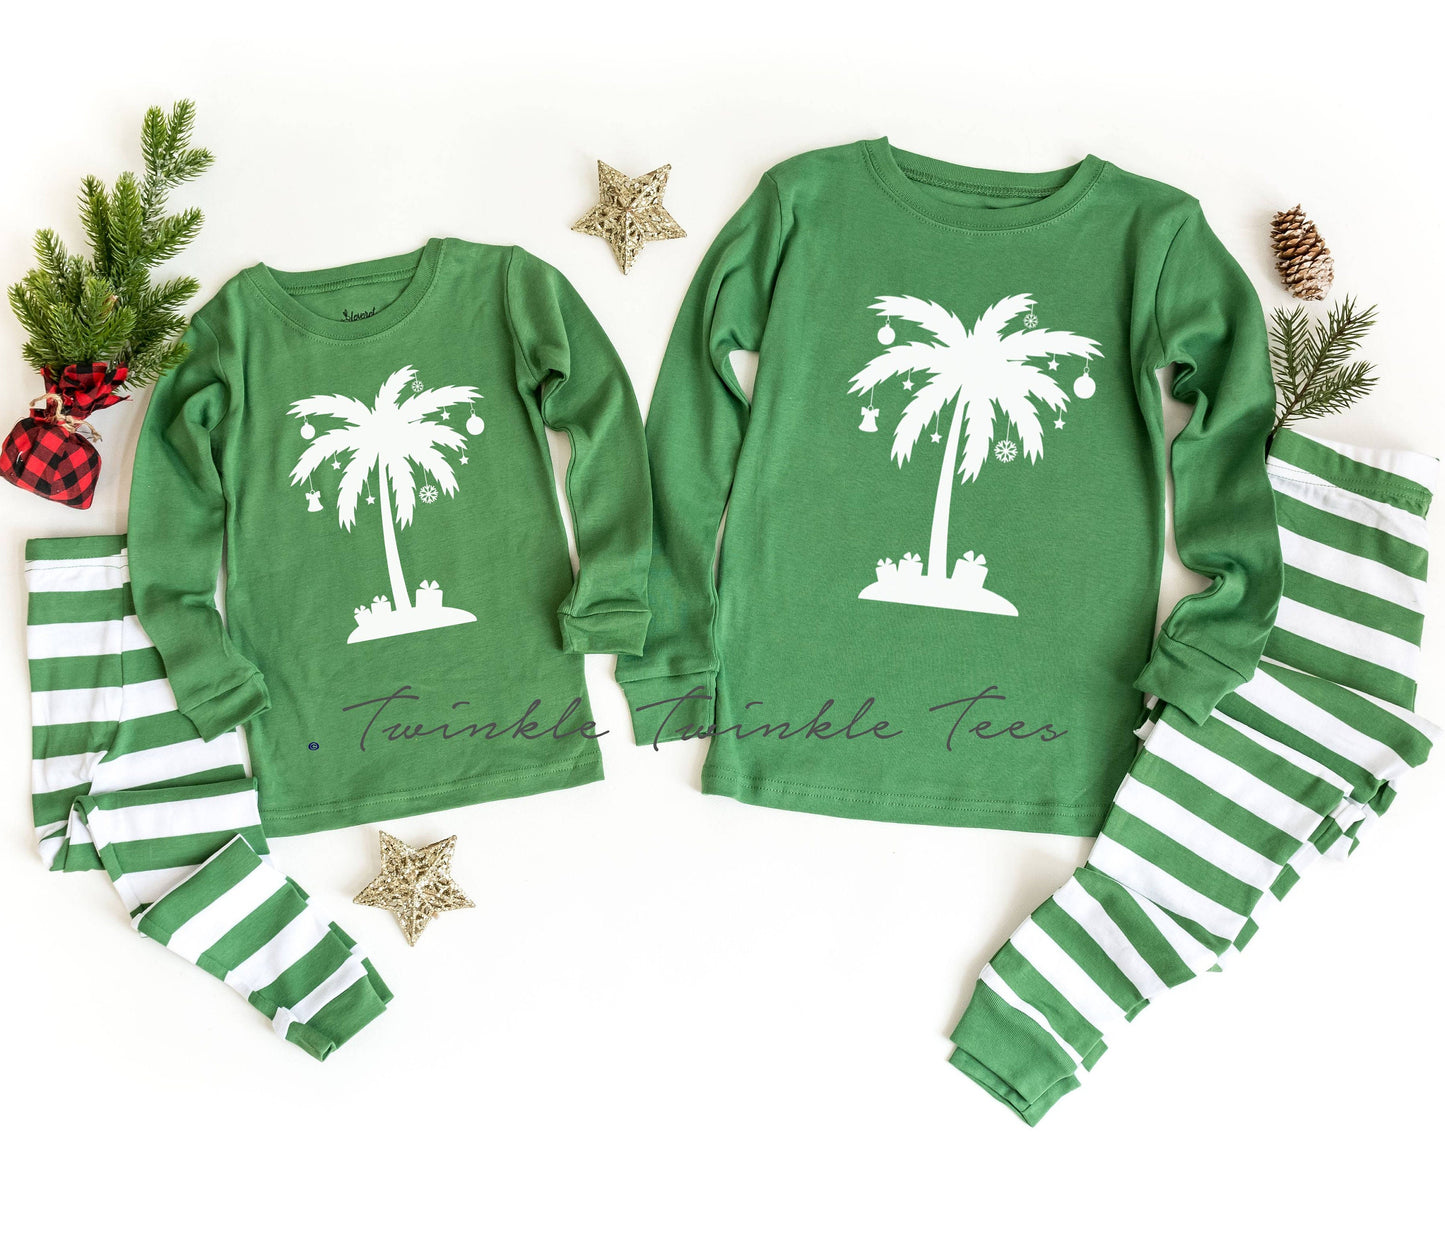 Green or Red Striped Christmas Palm Tree Pajamas - Tropical Christmas Pajamas - Beach Christmas